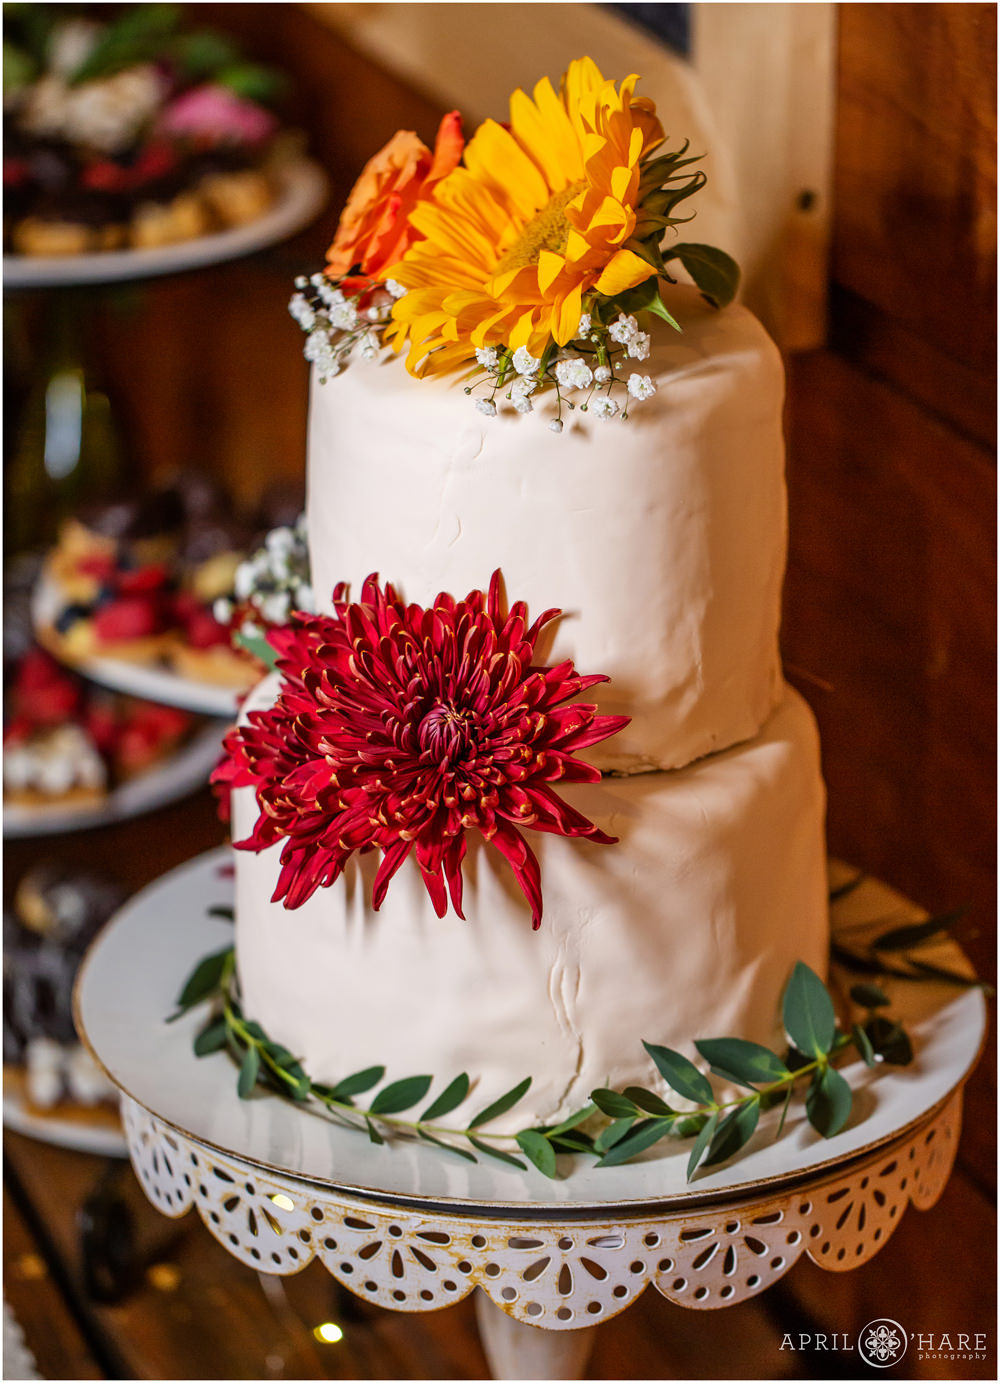 Cake by Christine Clancy for a fall wedding at the rustic wood cabin wedding venue in Vail